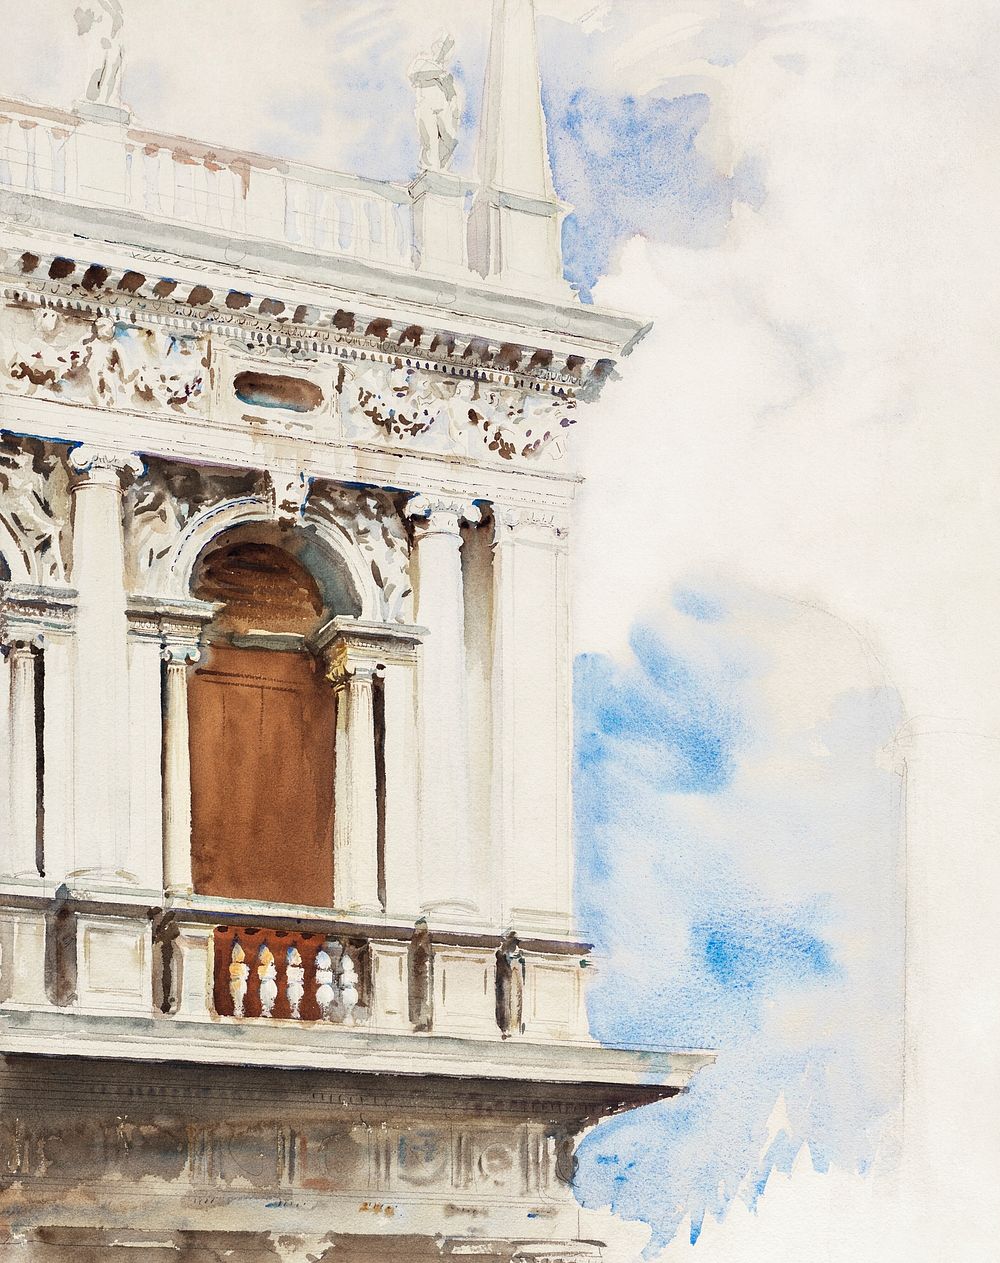 A Corner of the Library in Venice (ca. 1904&ndash;1907) by John Singer Sargent. Original from The National Gallery of Art.…